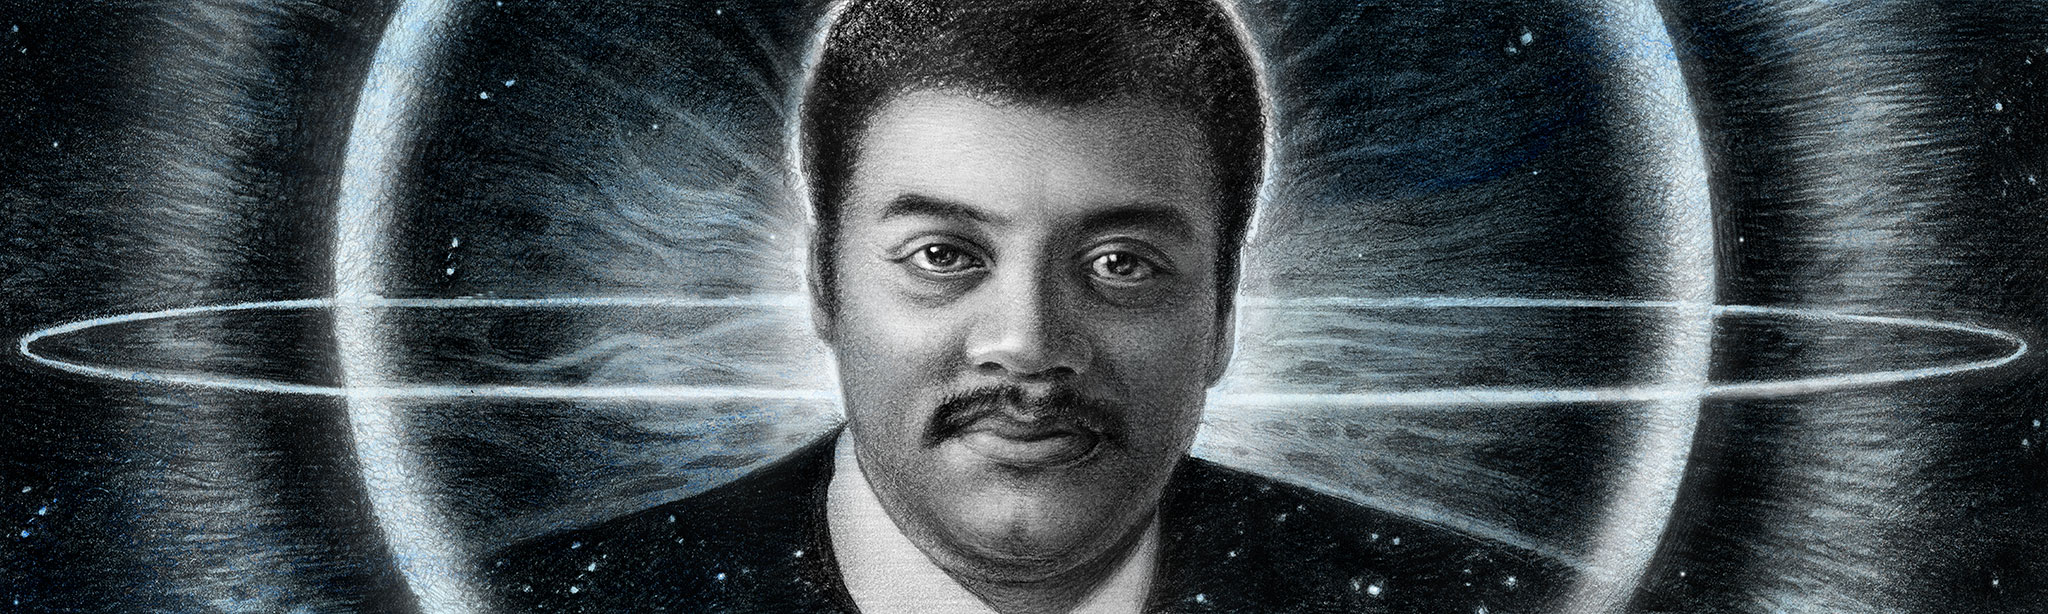 Neil deGrasse Tyson depicted in a monochromatic painting which shows his head with radial and ring formations behind him.